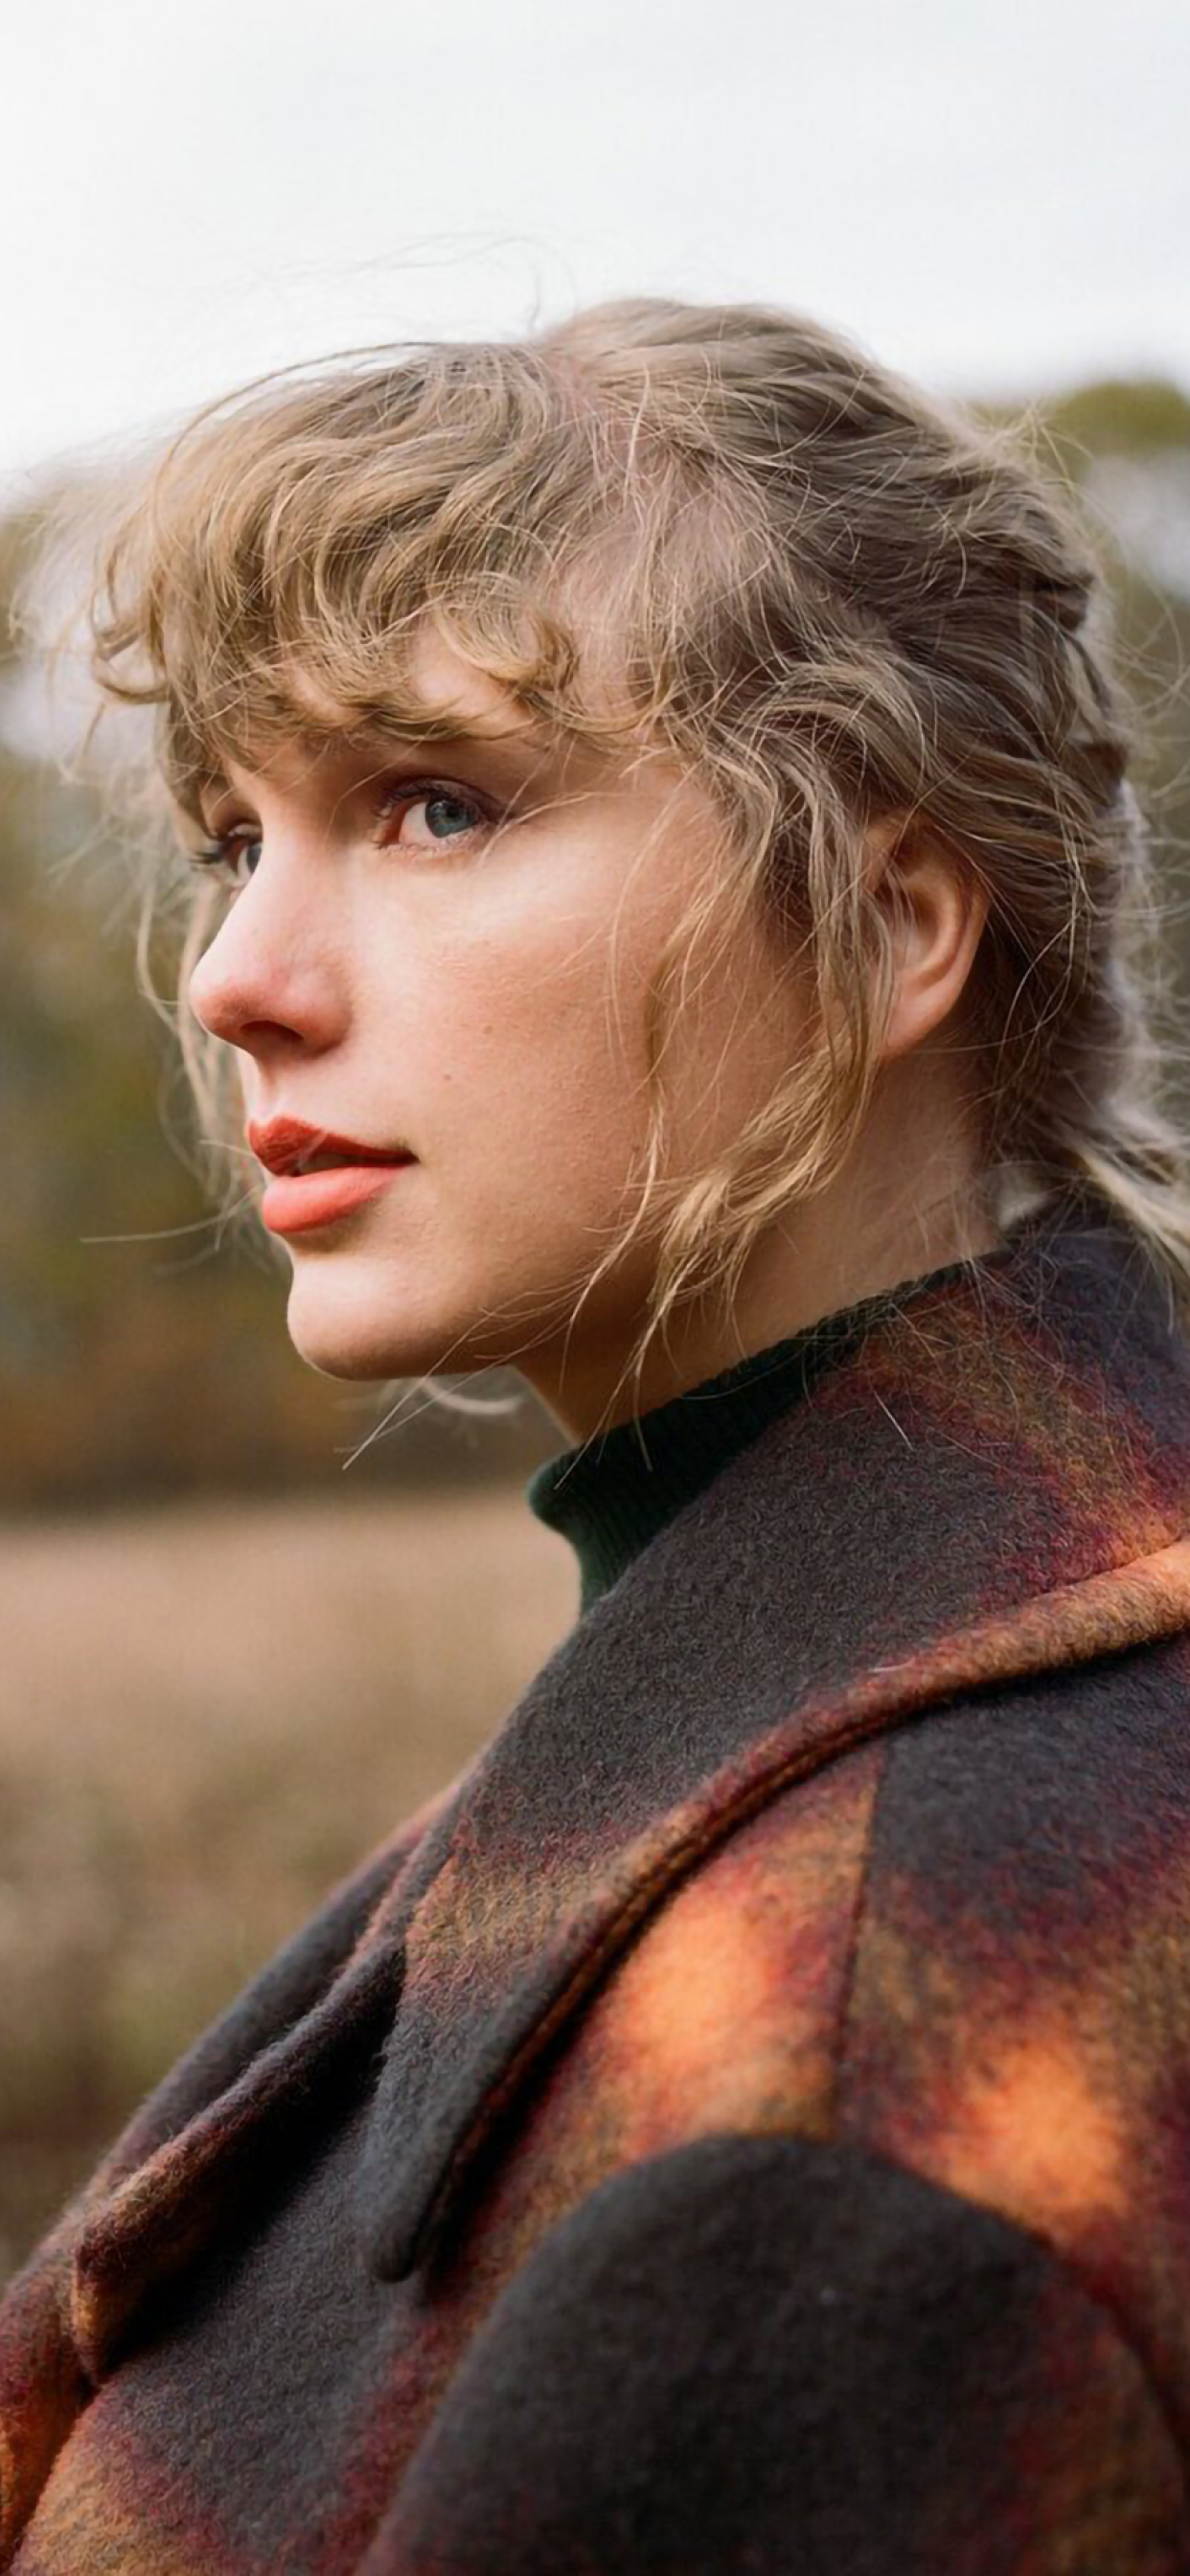 1242x2688 Taylor Swift Evermore Album Iphone Xs Max Wallpaper Hd Celebrities 4k Wallpapers Images Photos And Background